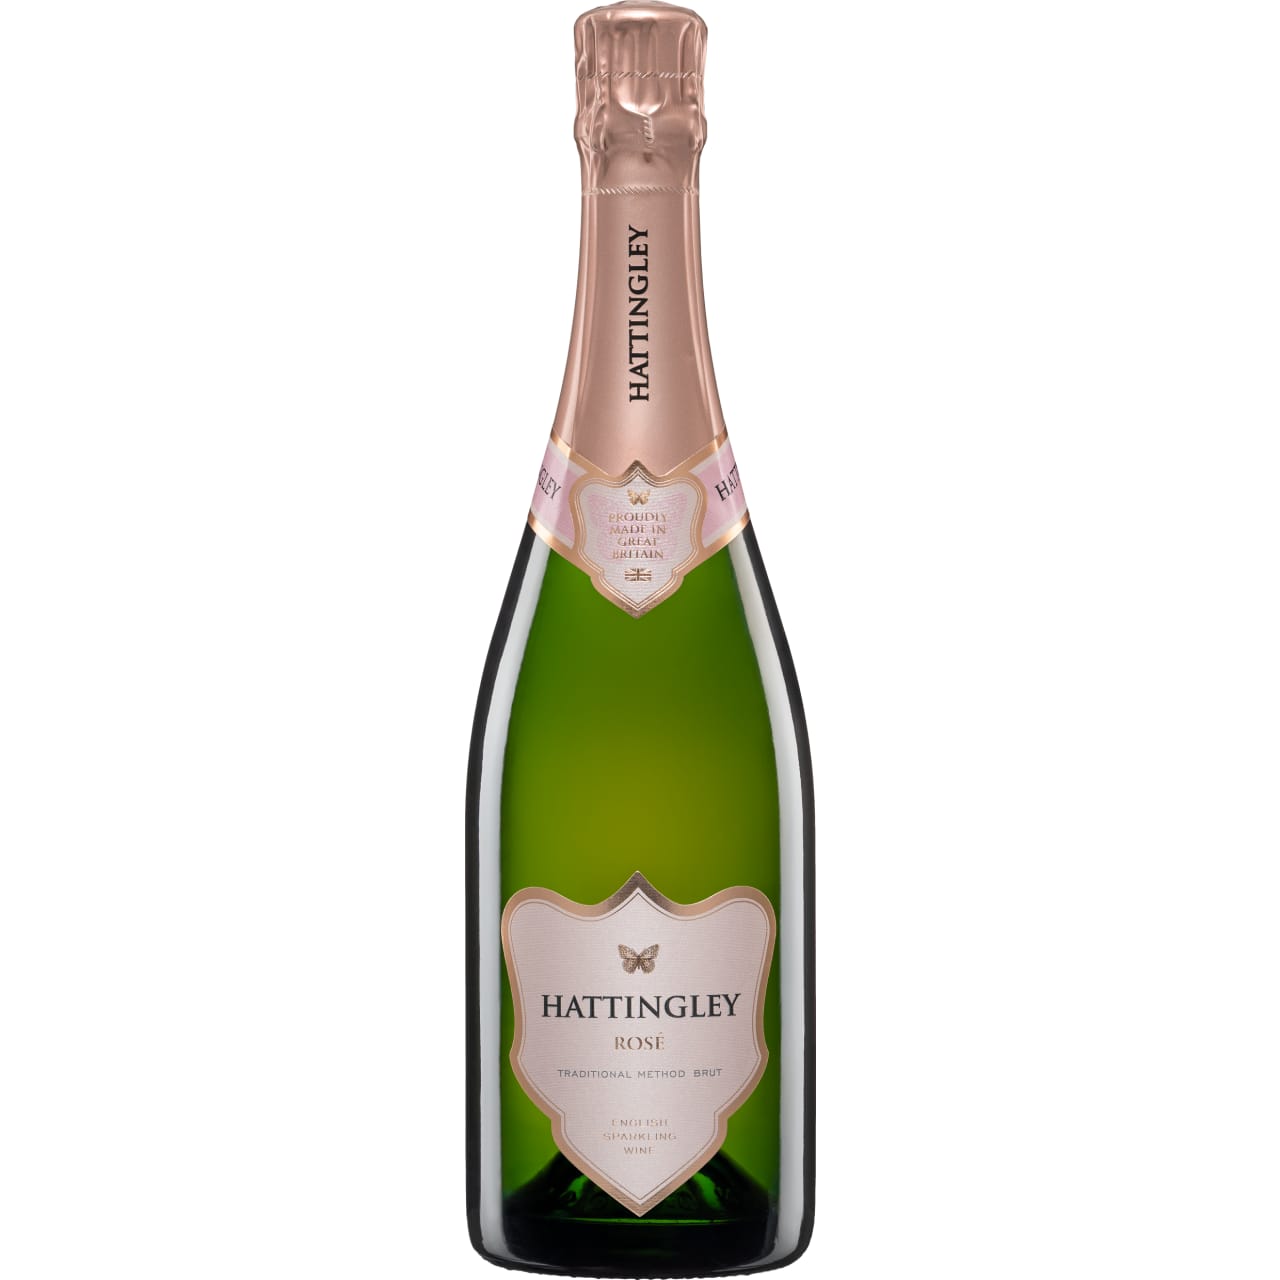 Master Award - The Global Rosé Masters, 2018 92/100 - "a very impressive sparkling Rosé" - Neal Martin. An elegant rosé, boasting redcurrants, strawberries and cream, with the tiniest hint of toast from its time in barrel.